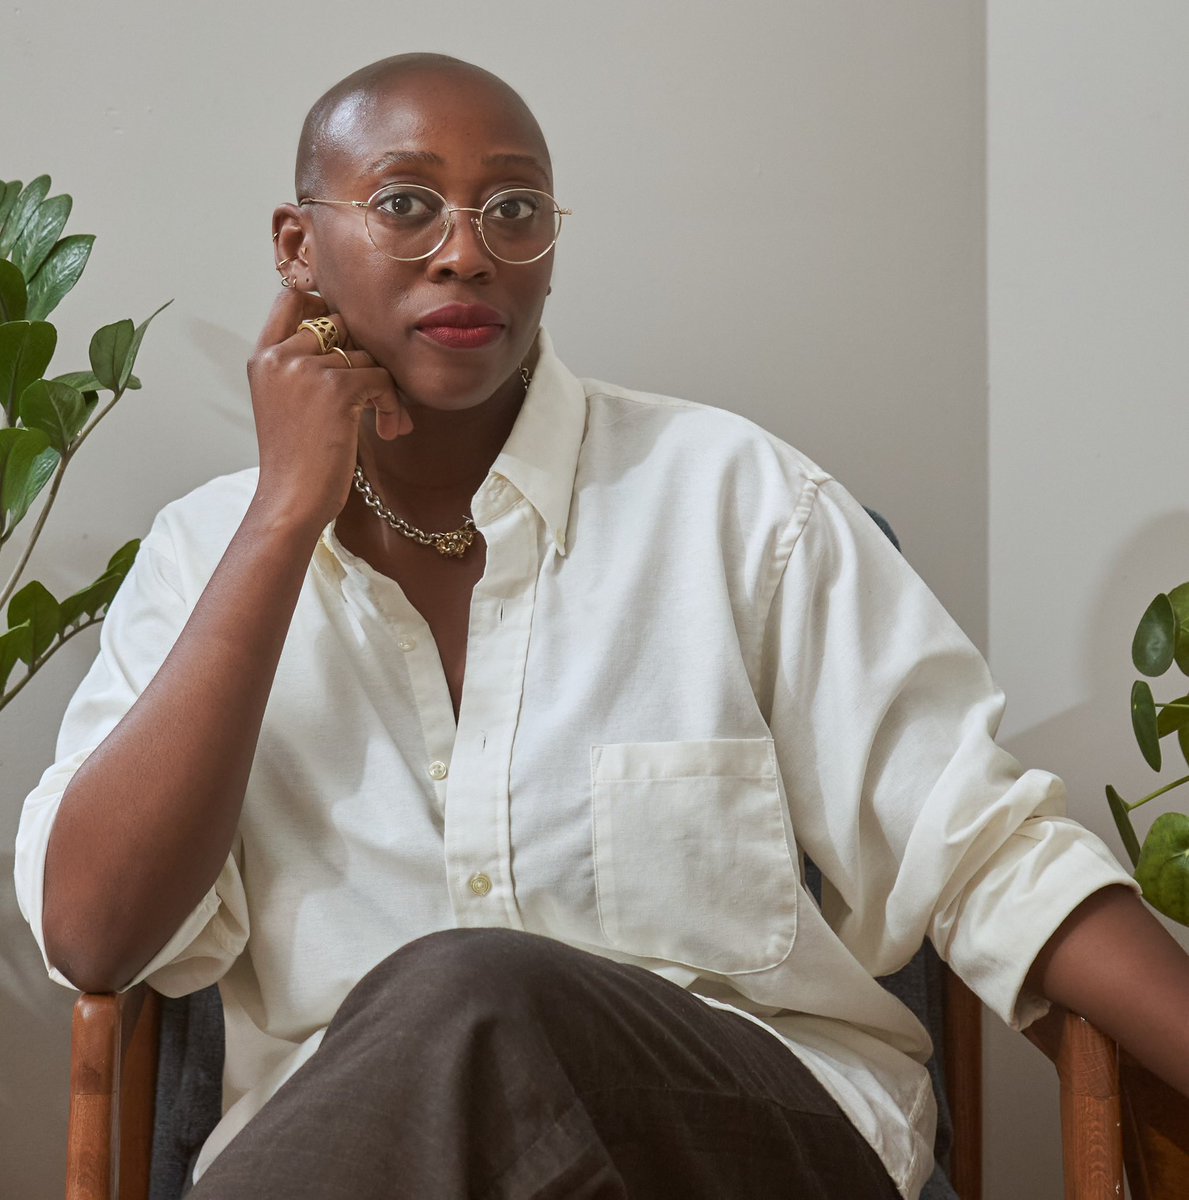 We are pleased to welcome ’Pemi Aguda (@PemiAguda) as a Tutor for Lolwe Academy. ’Pemi’s debut collection, Ghostroots, and debut novel, The Suicide Mothers, will be published by W. W. Norton, Virago and Masobe Books.
academy.lolwe.org/pemi-aguda/